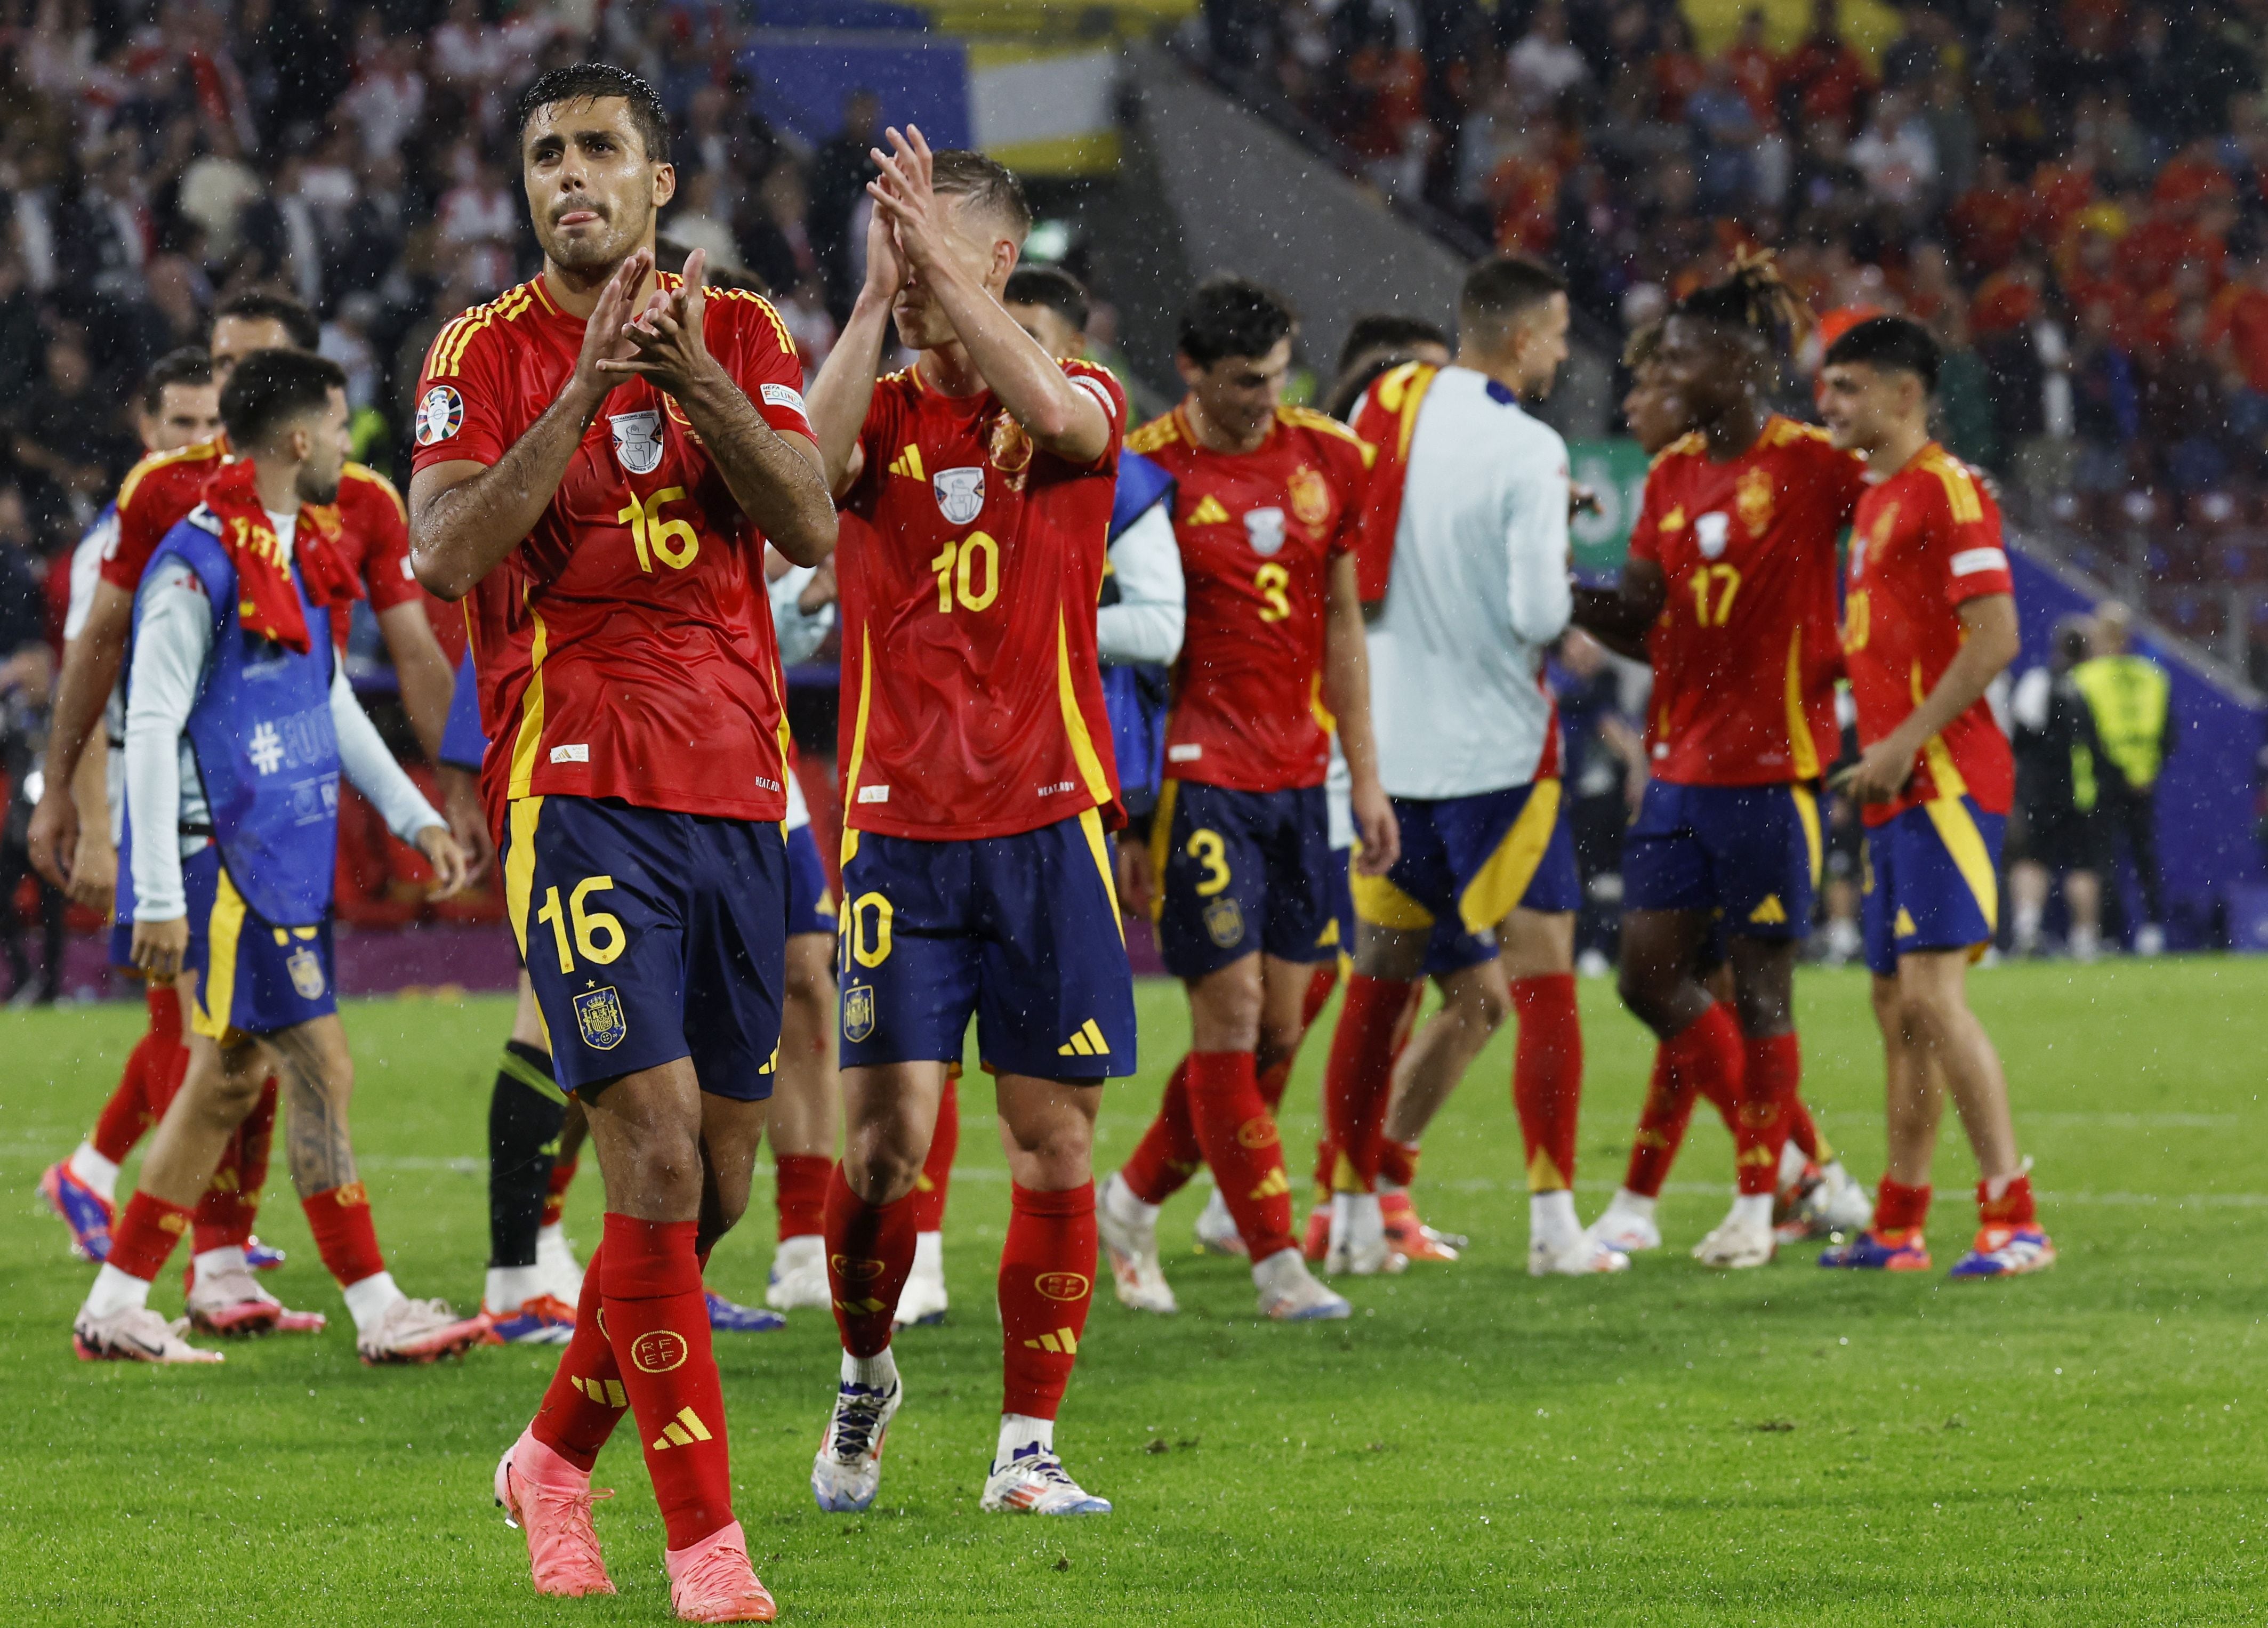 Cologne (Germany), 30/06/2024.- Spain players Mikel Merino (L) applaud to supporters after winning the UEFA EURO 2024 Round of 16 soccer match between Spain and Georgia, in Cologne, Germany, 30 June 2024. (Alemania, España, Colonia) EFE/EPA/ROBERT GHEMENT
